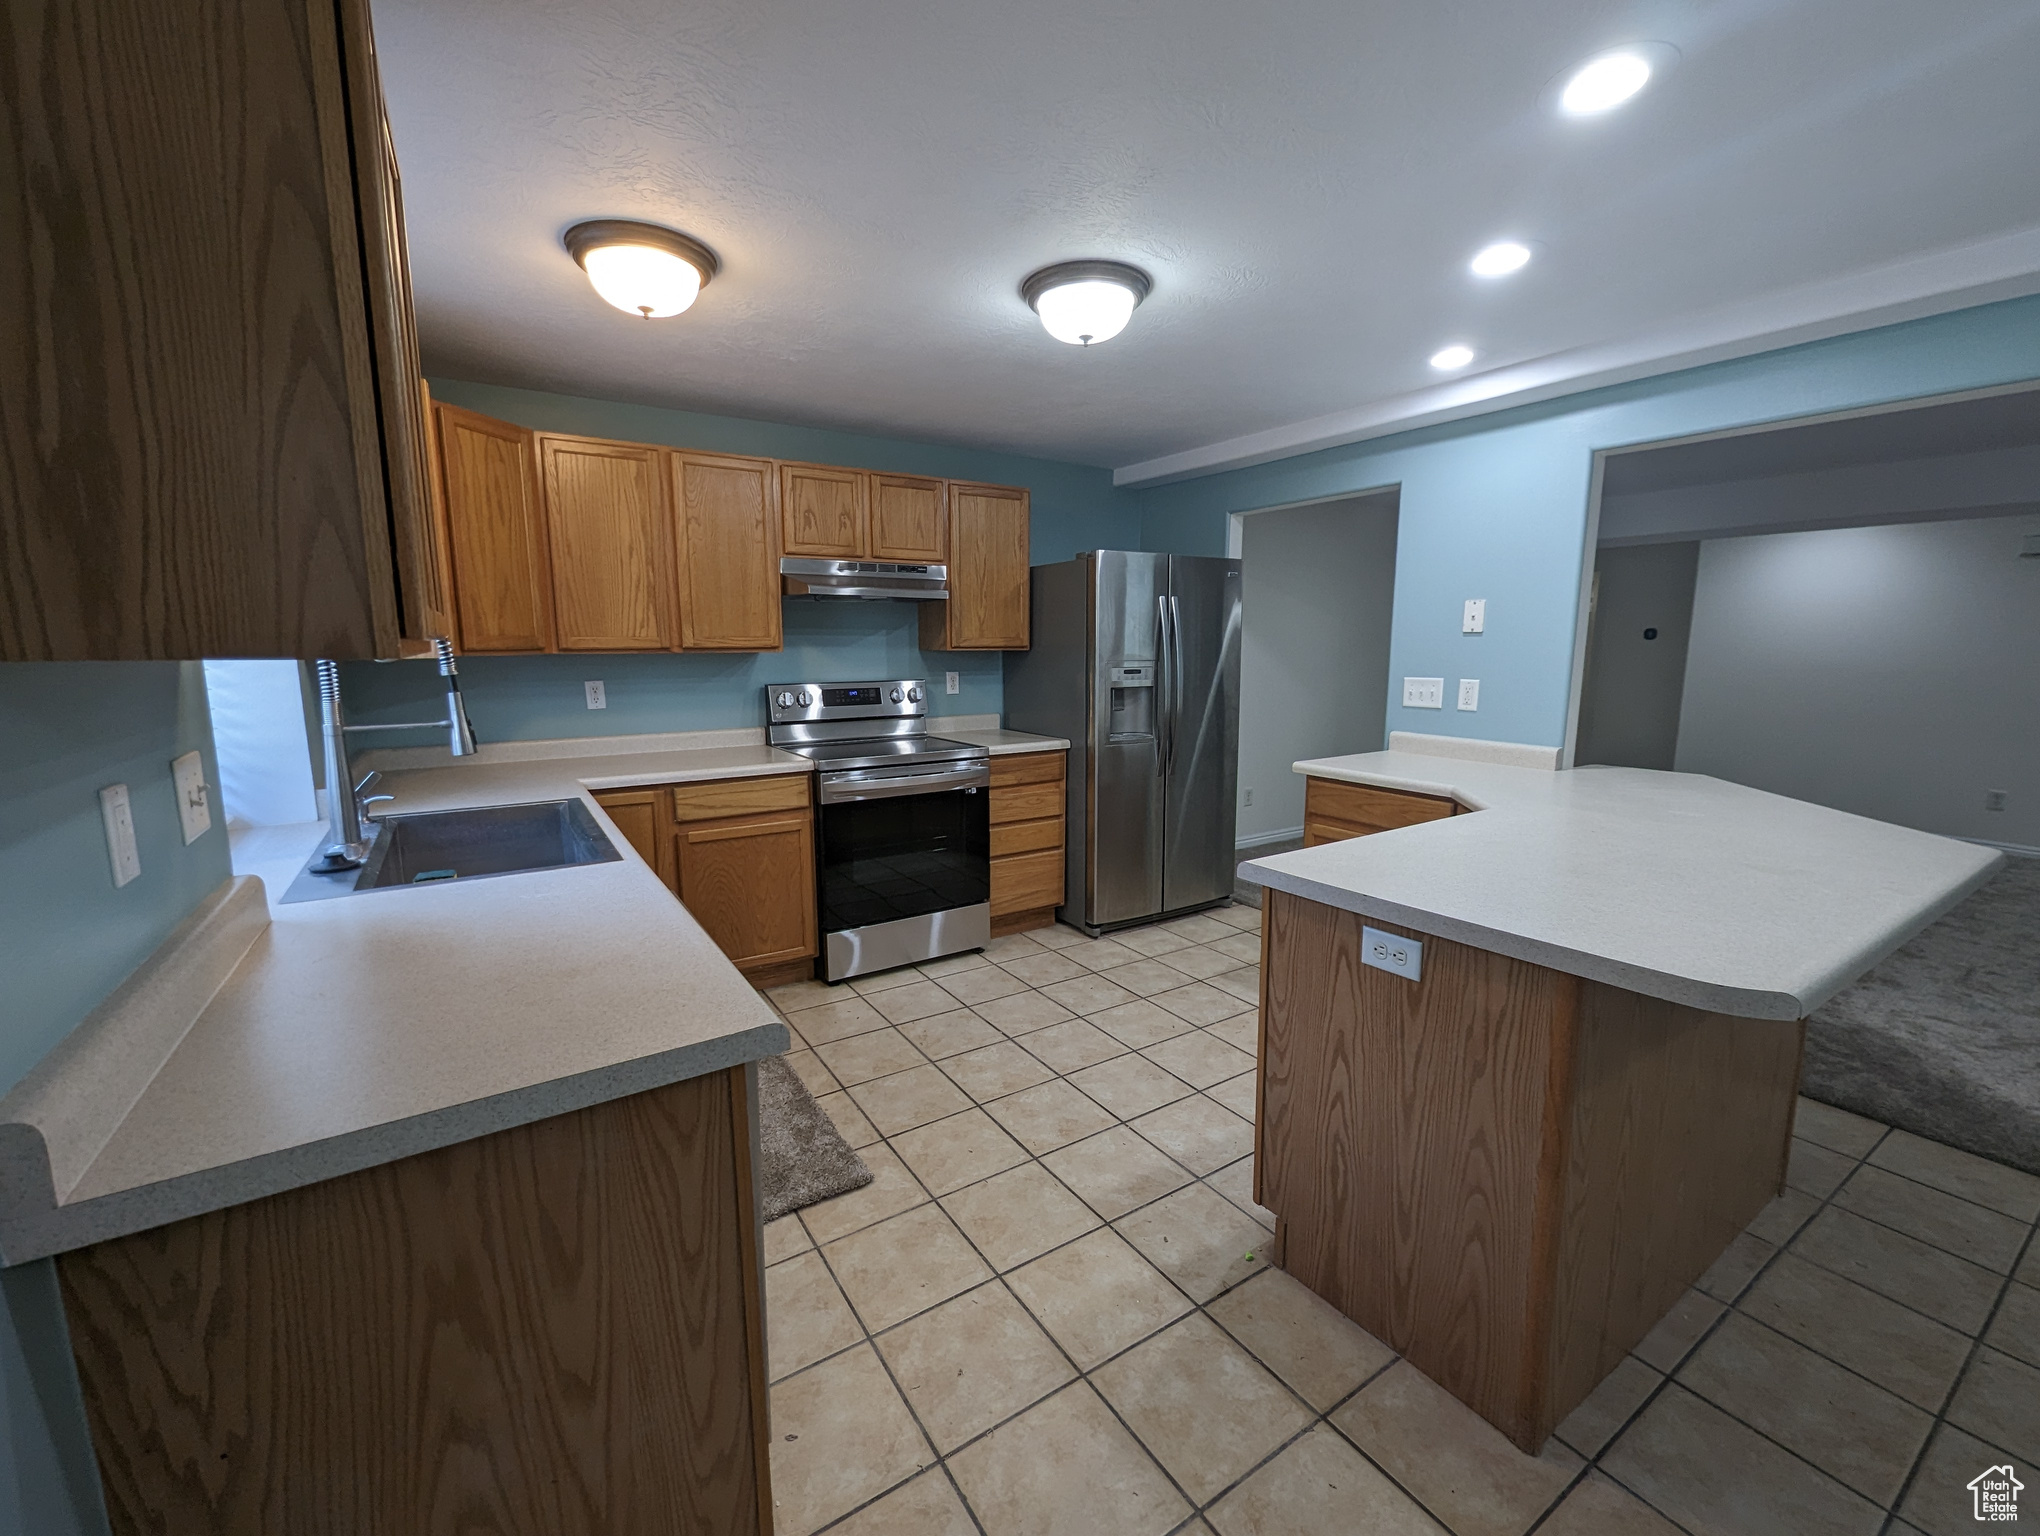 Kitchen with stainless steel appliances, light tile floors, and sink